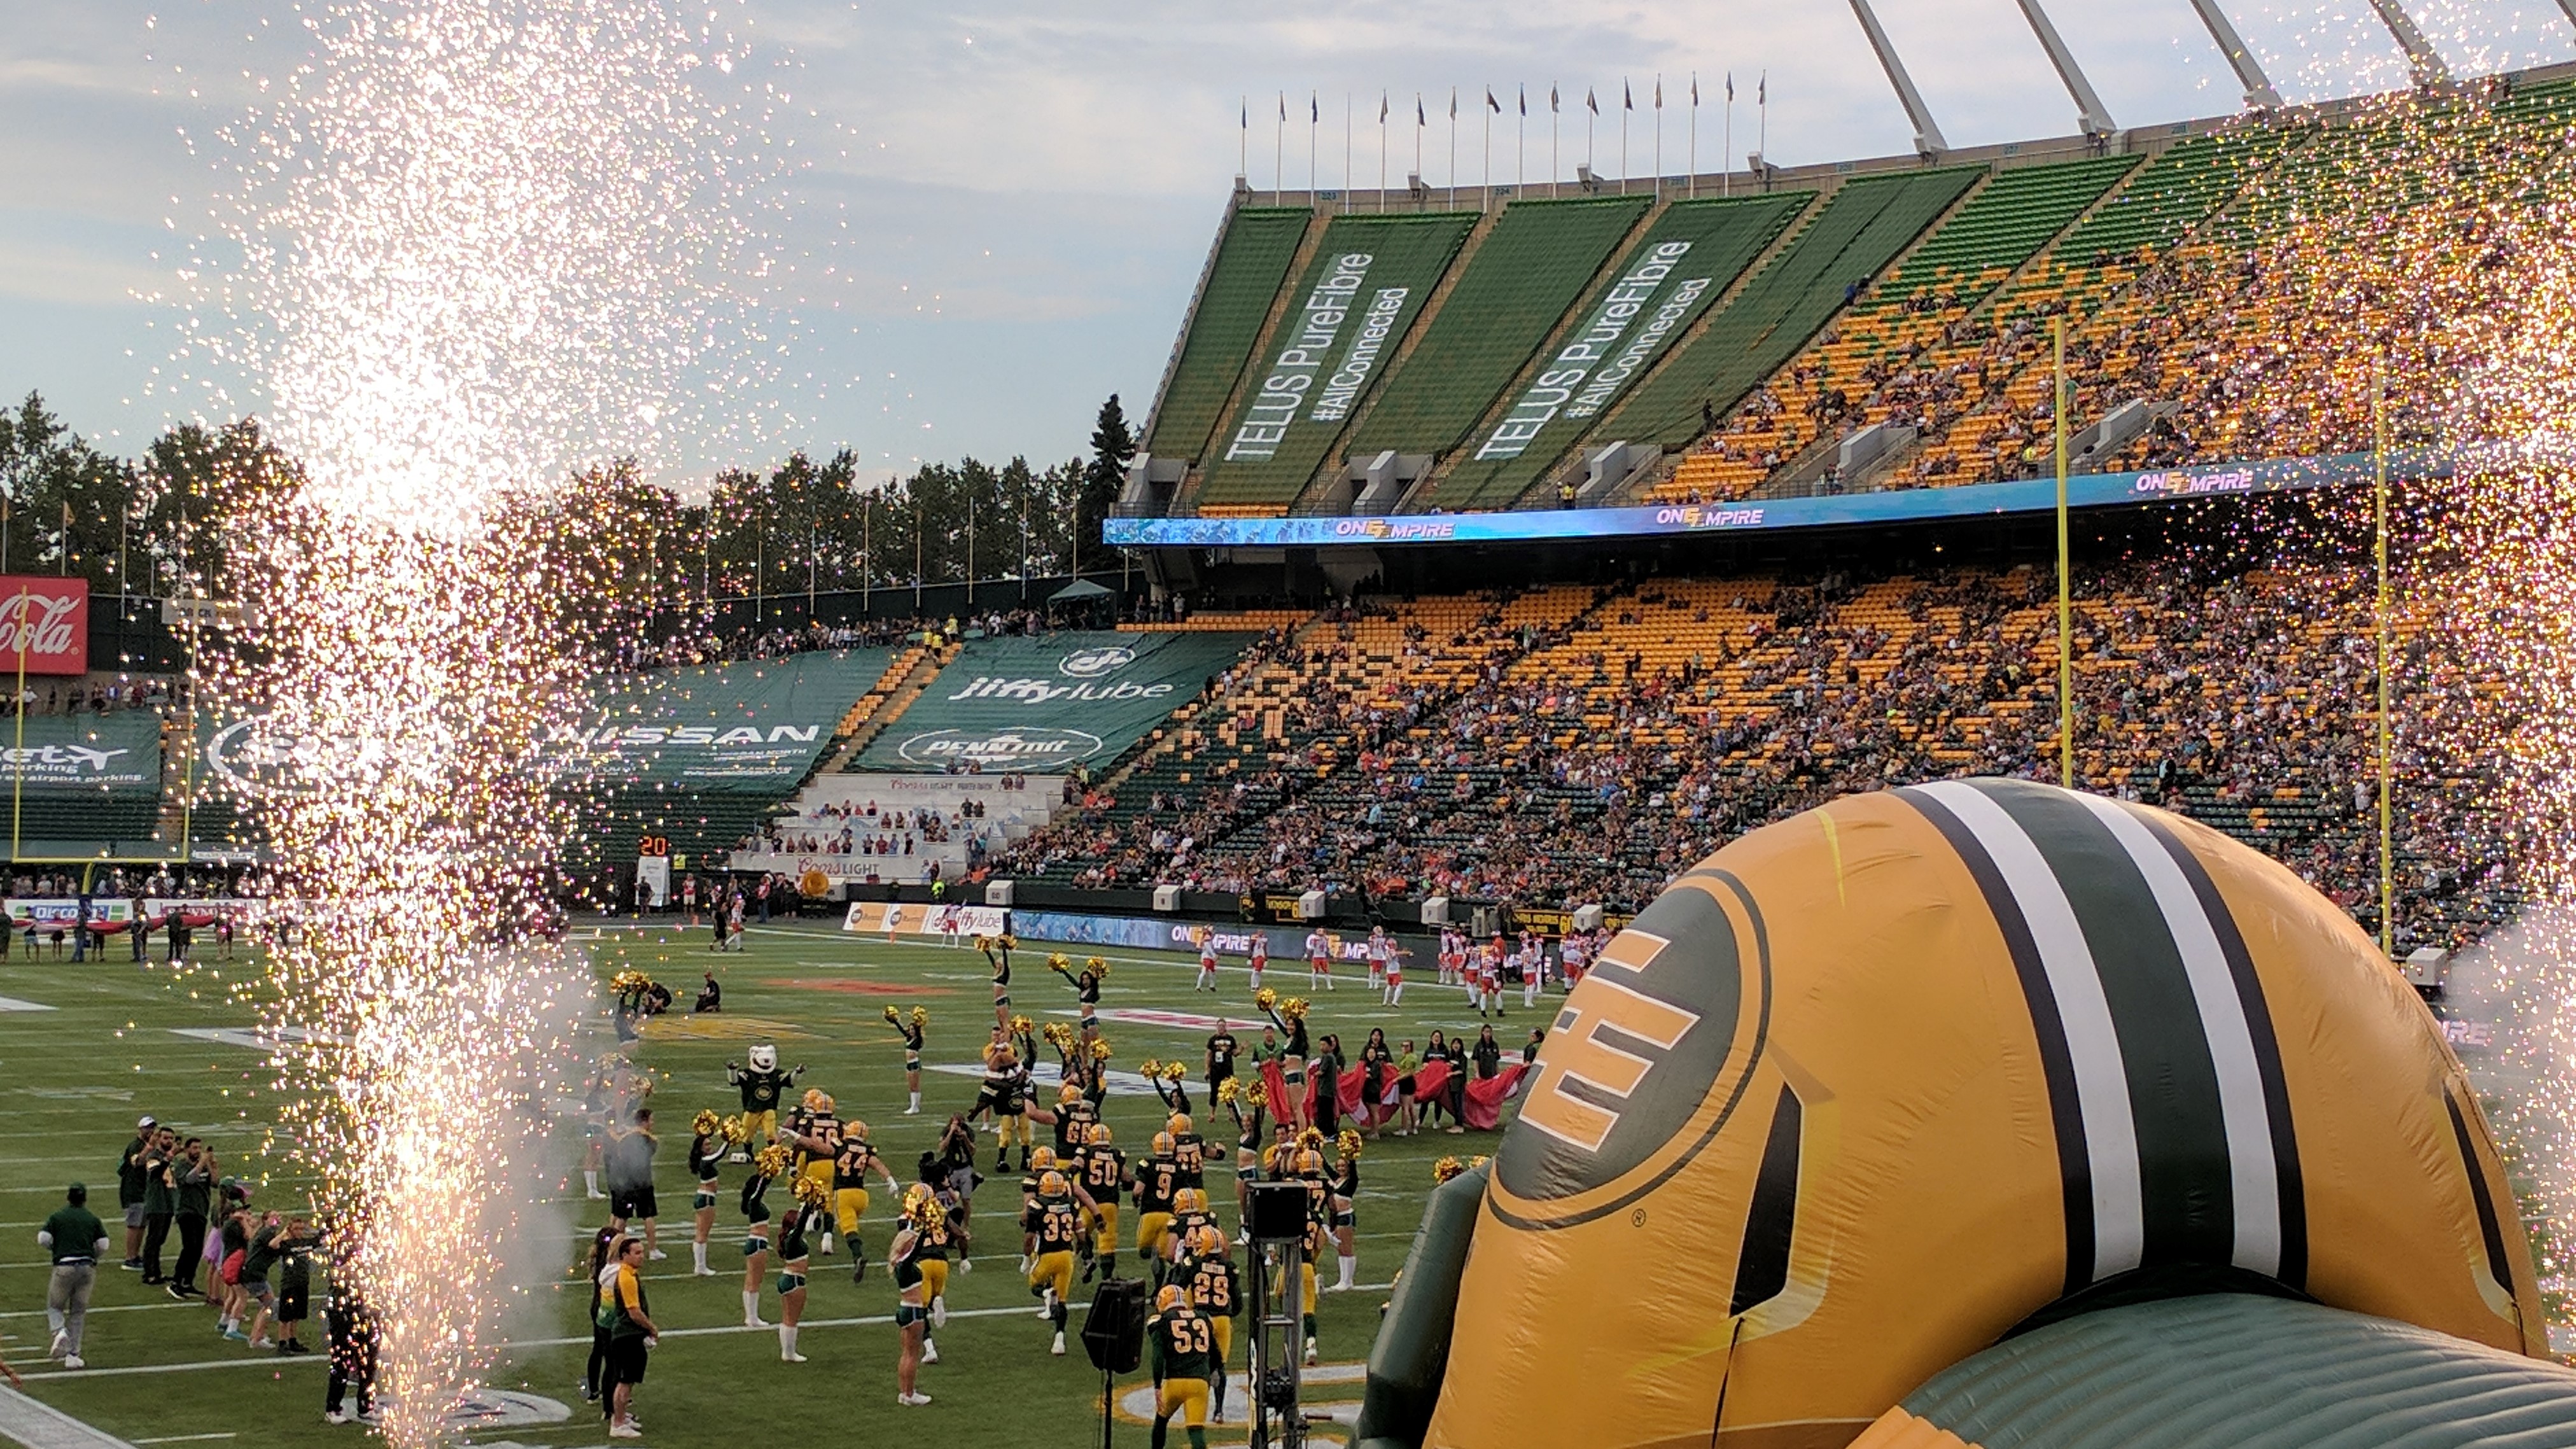 Edmonton Eskimos charge onto the field at a Canadian Football League game in July, 2017